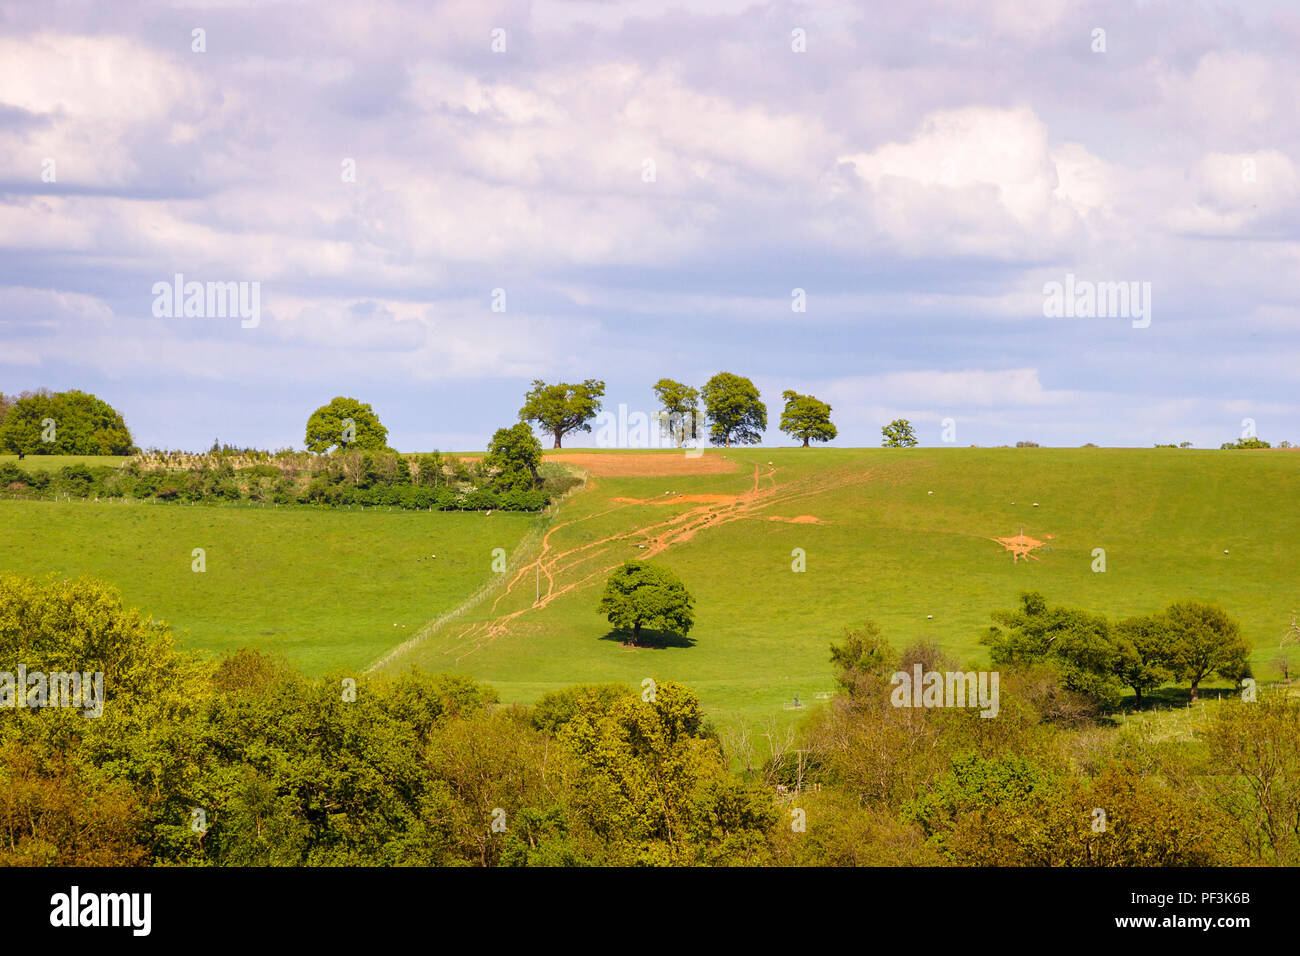 Panoramic view of unspoilt rural fields and farmland on Surrey Downs near Godalming, Surrey, UK in spring on a sunny day with fluffy white clouds Stock Photo